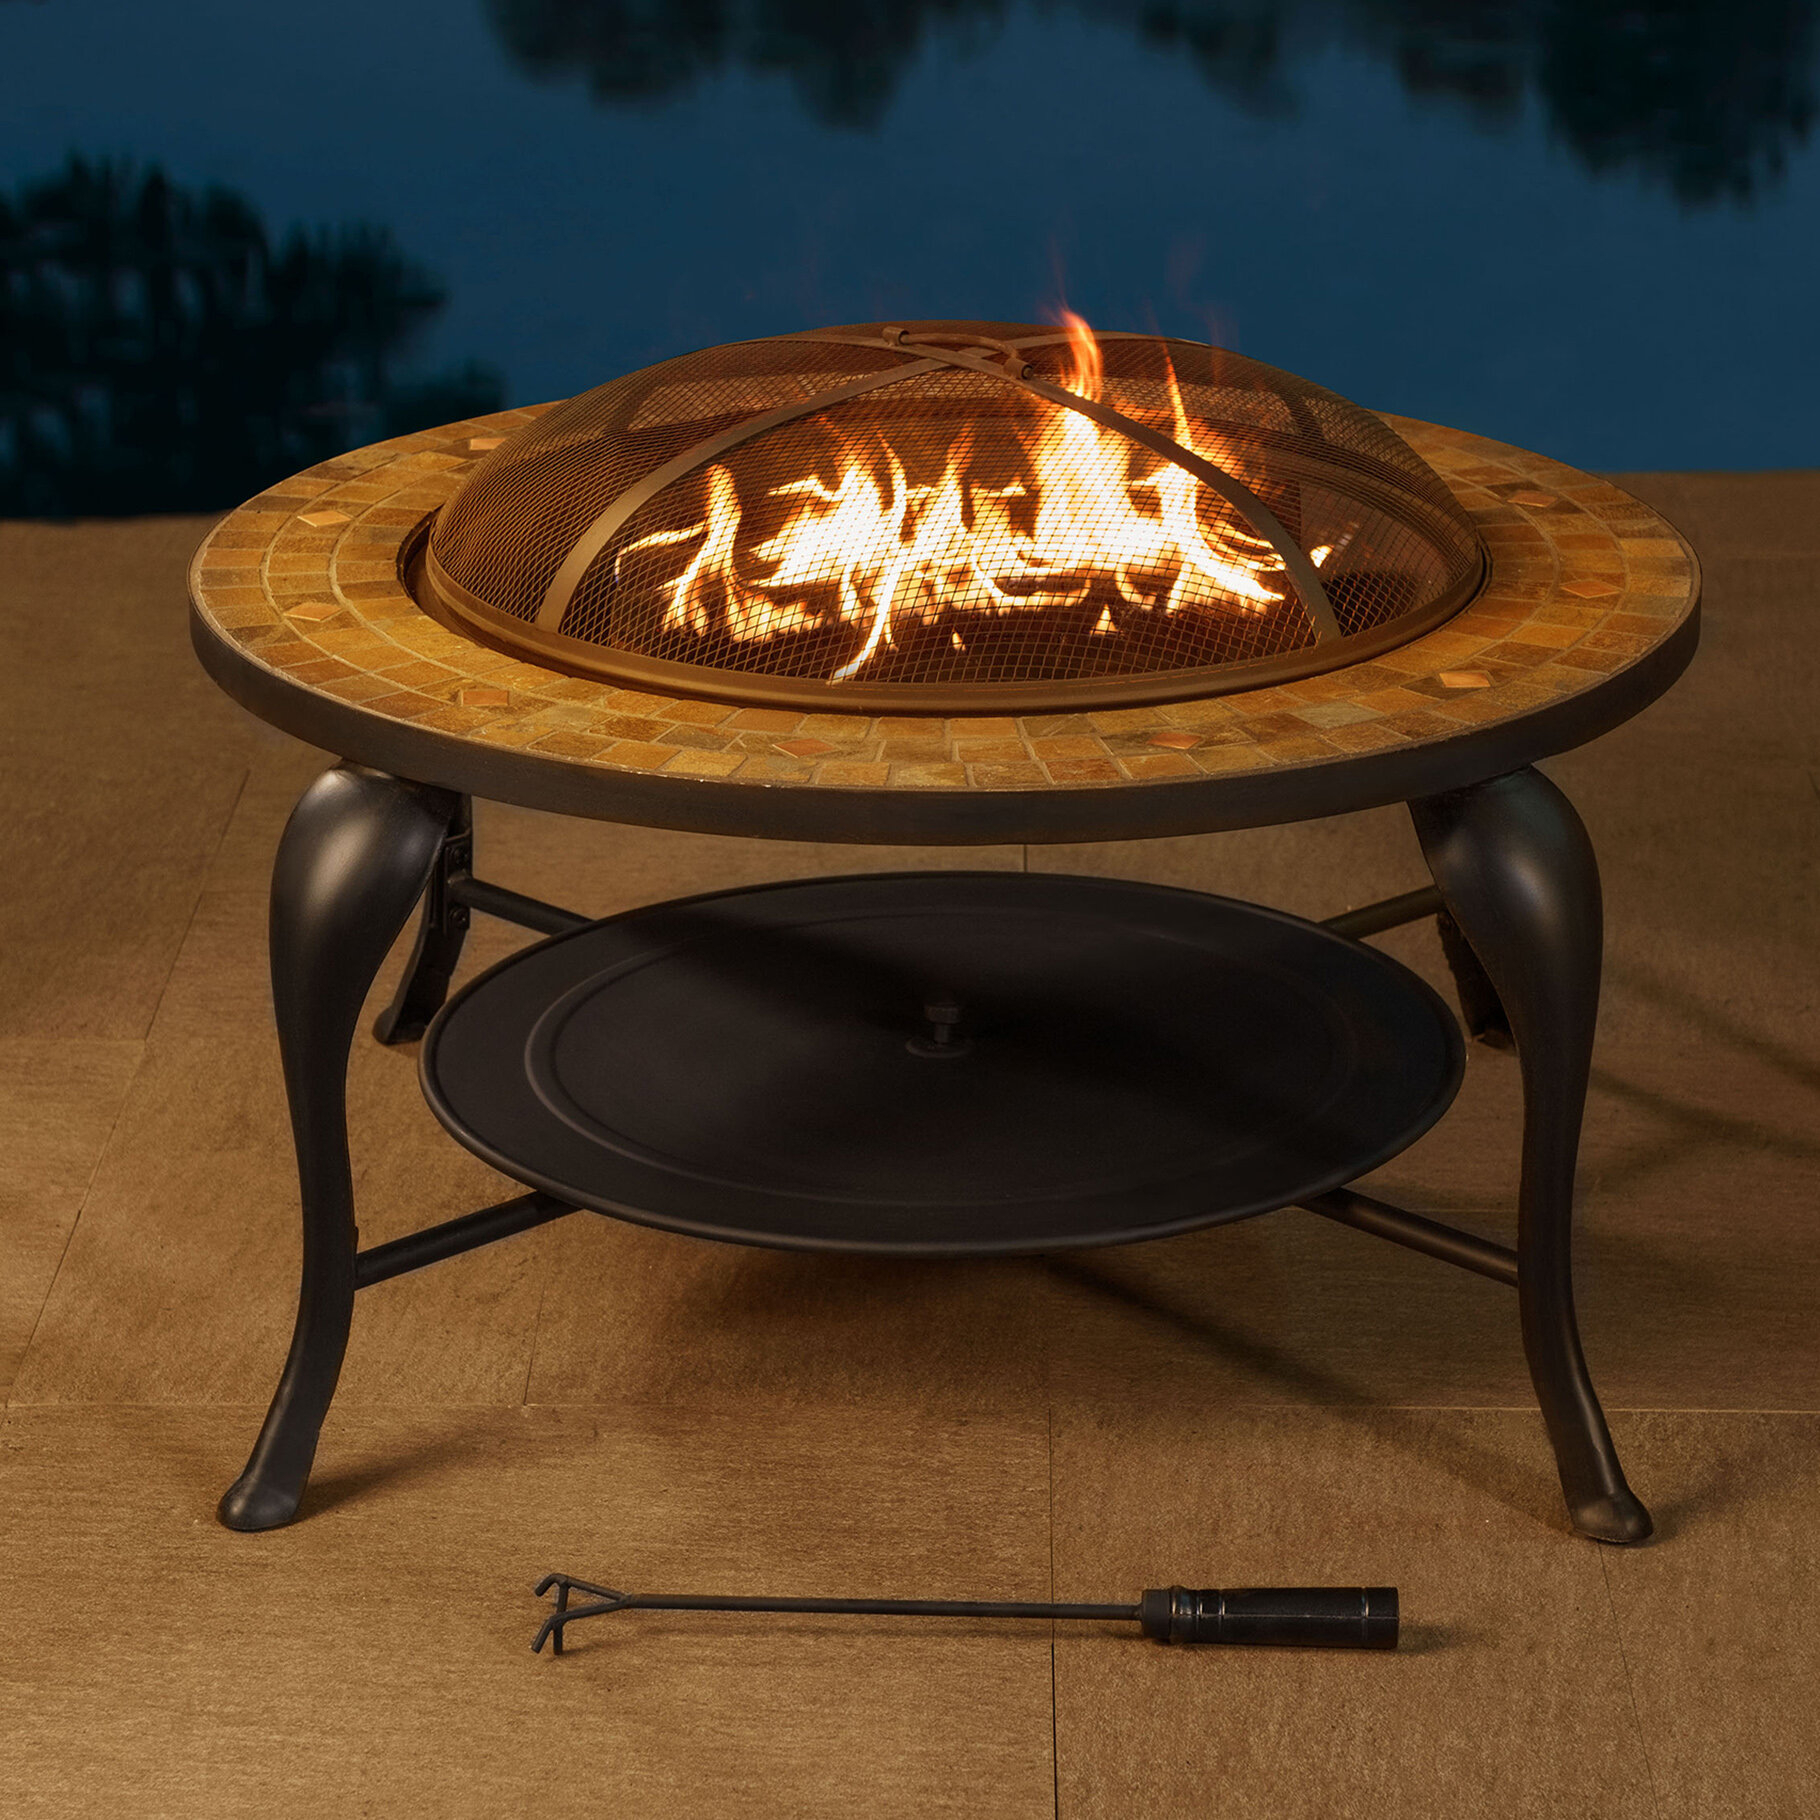 Wood Burning Fire Pit Table Visualhunt, Wood Burning Fire Pit Table Setup